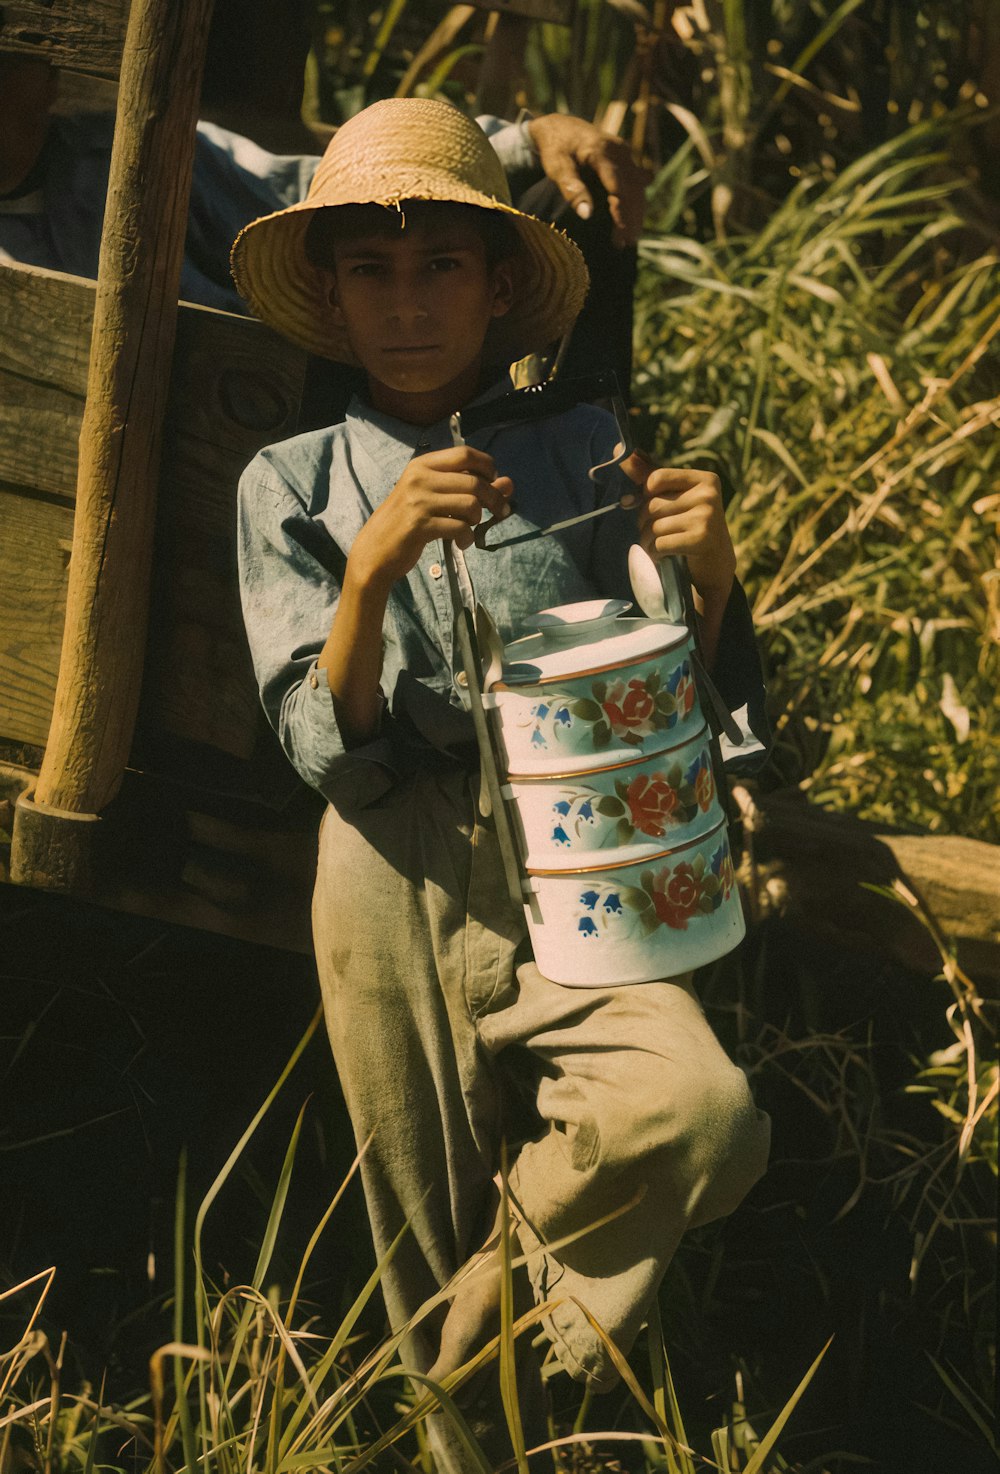 Son of one of the FSA farmers on the Rio Piedras project who brought lunch to his father, working in the sugar cane field, vicinity of Rio Piedras, Puerto Rico